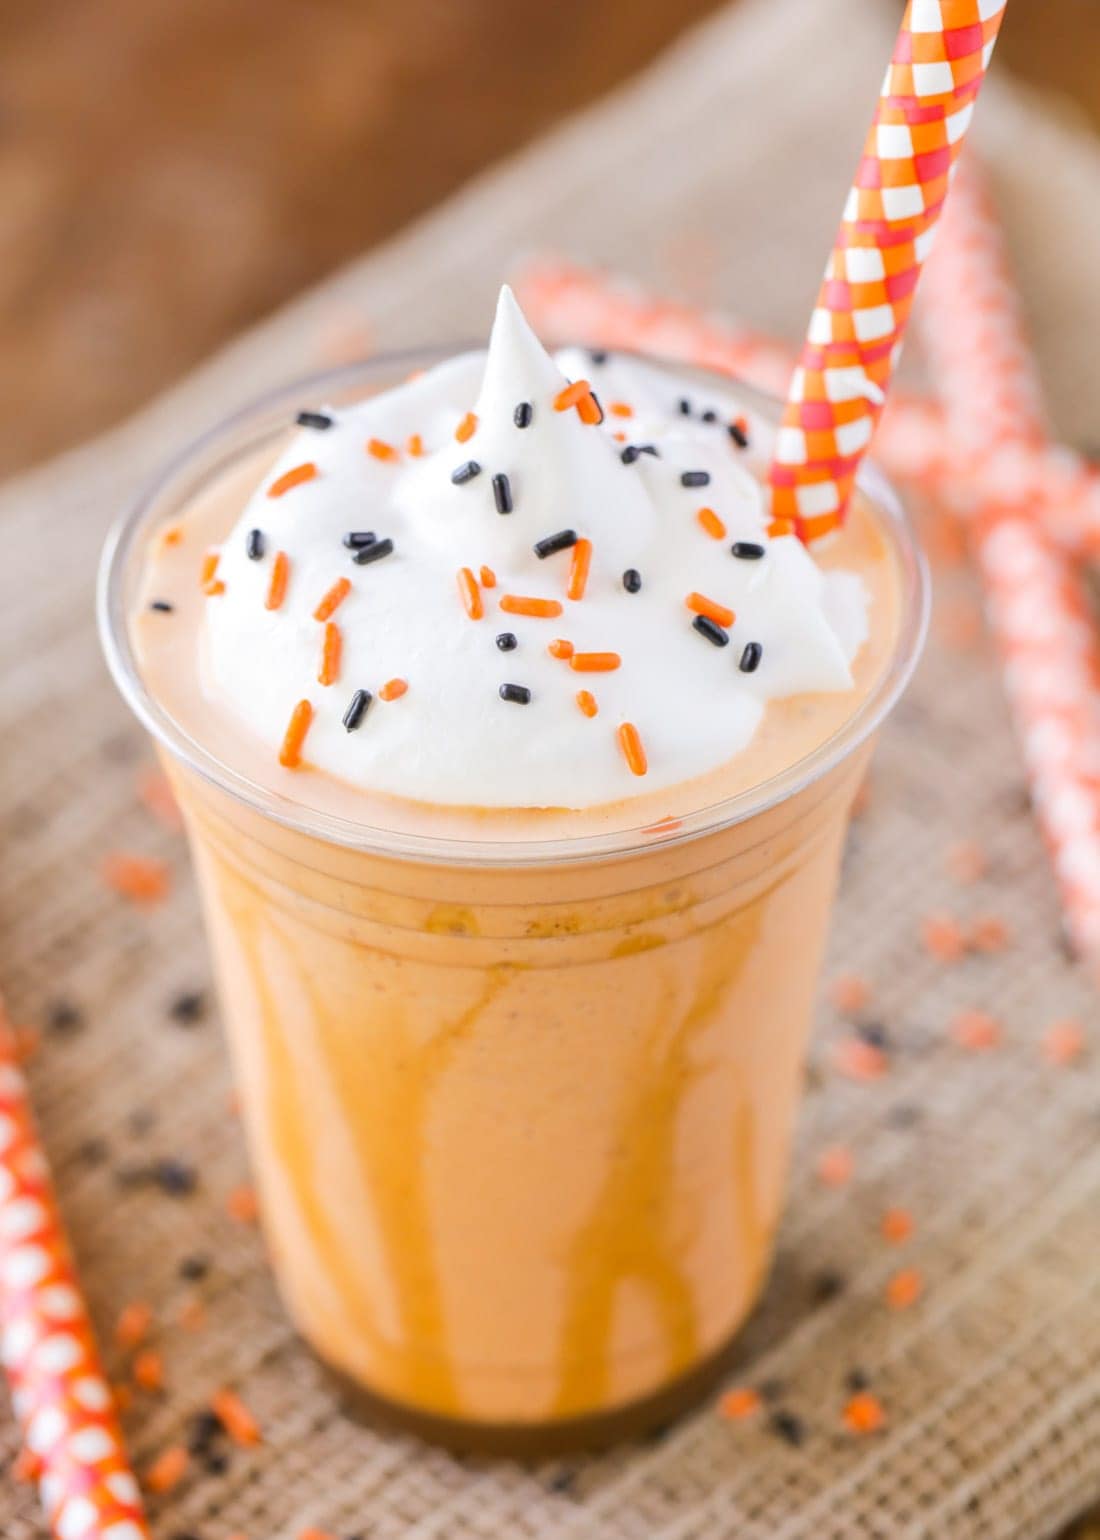 Pumpkin Milkshake recipe in cup with whipped cream and sprinkles